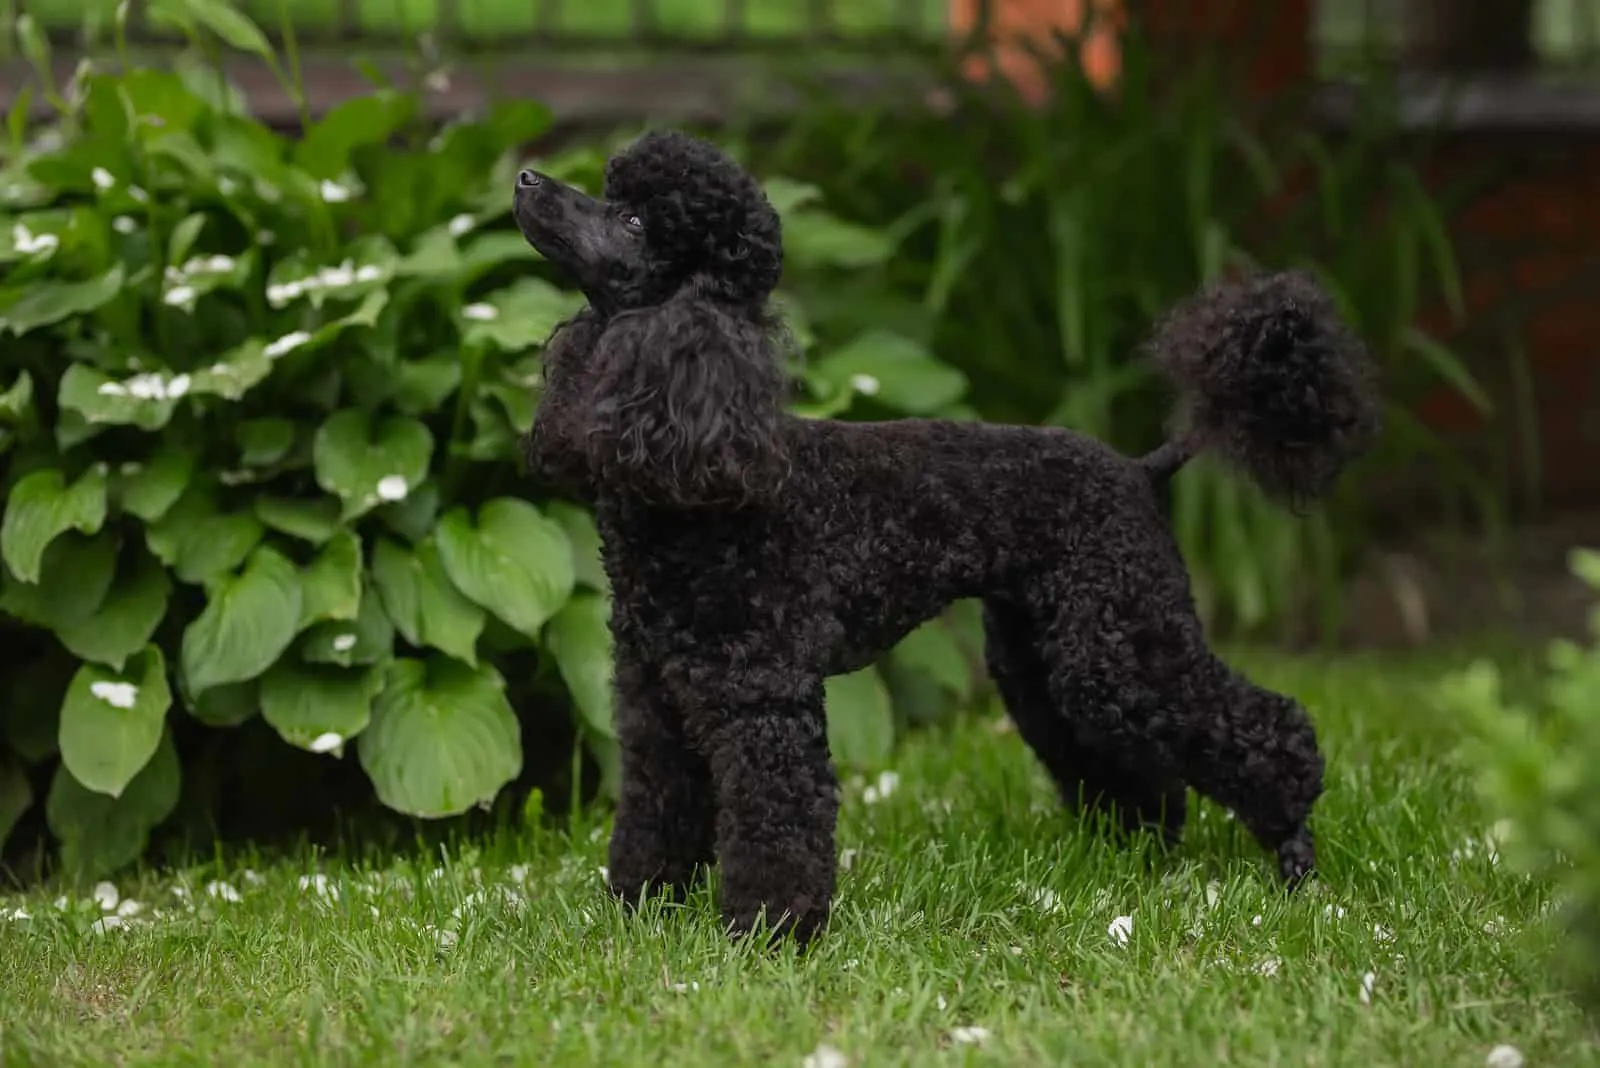 Miniature poodle puppy standing on the grass